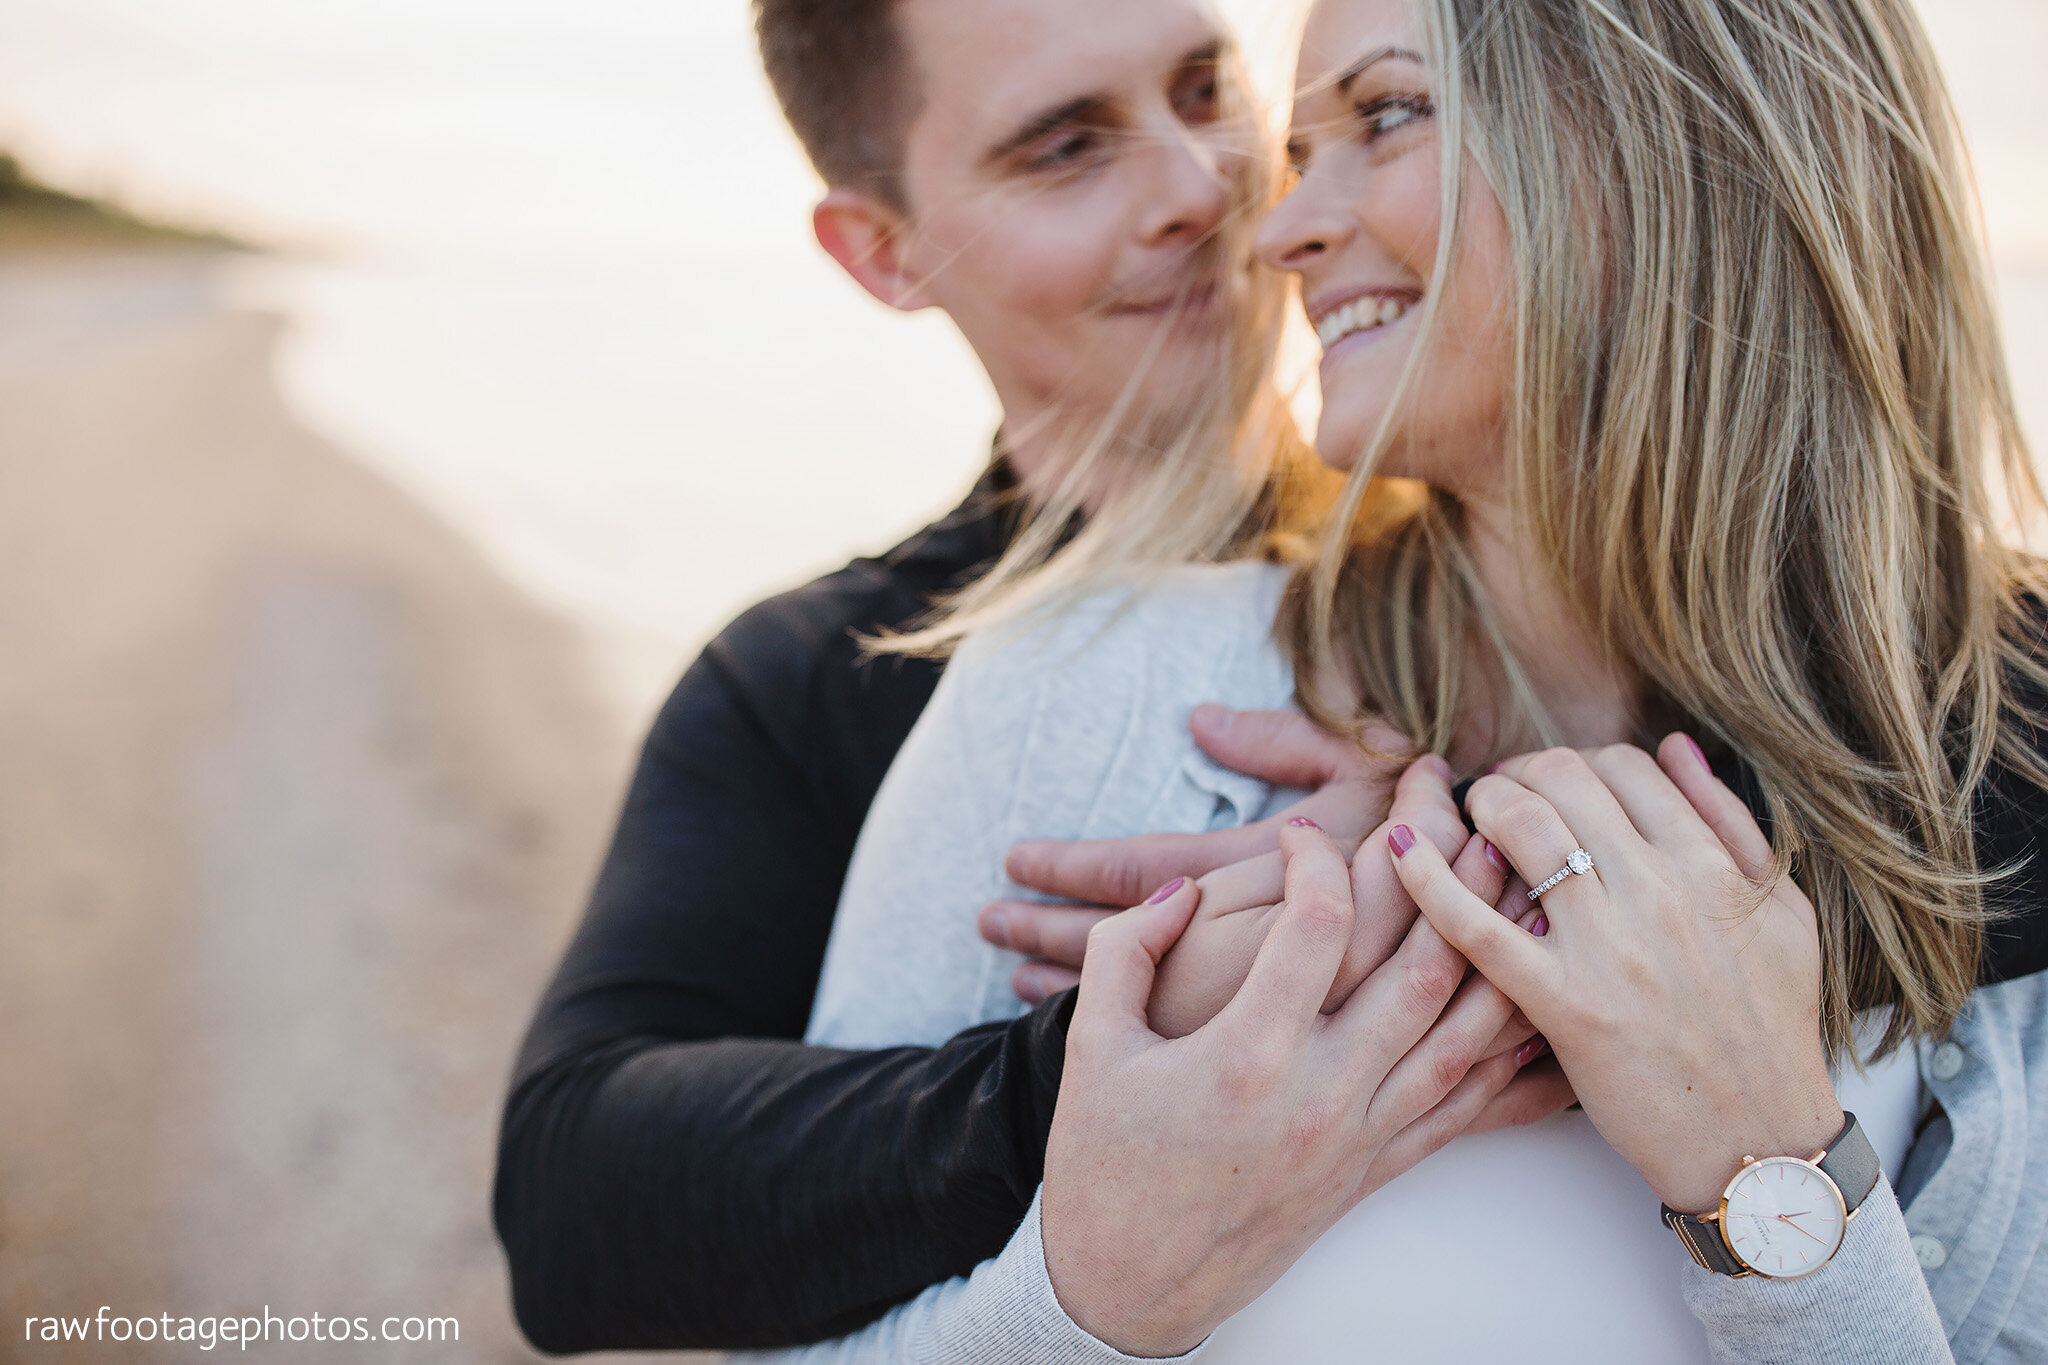 london_ontario_wedding_photographer-grand_bend_engagement_session-beach_engagement-sunset-forest-woods-raw_footage_photography021.jpg